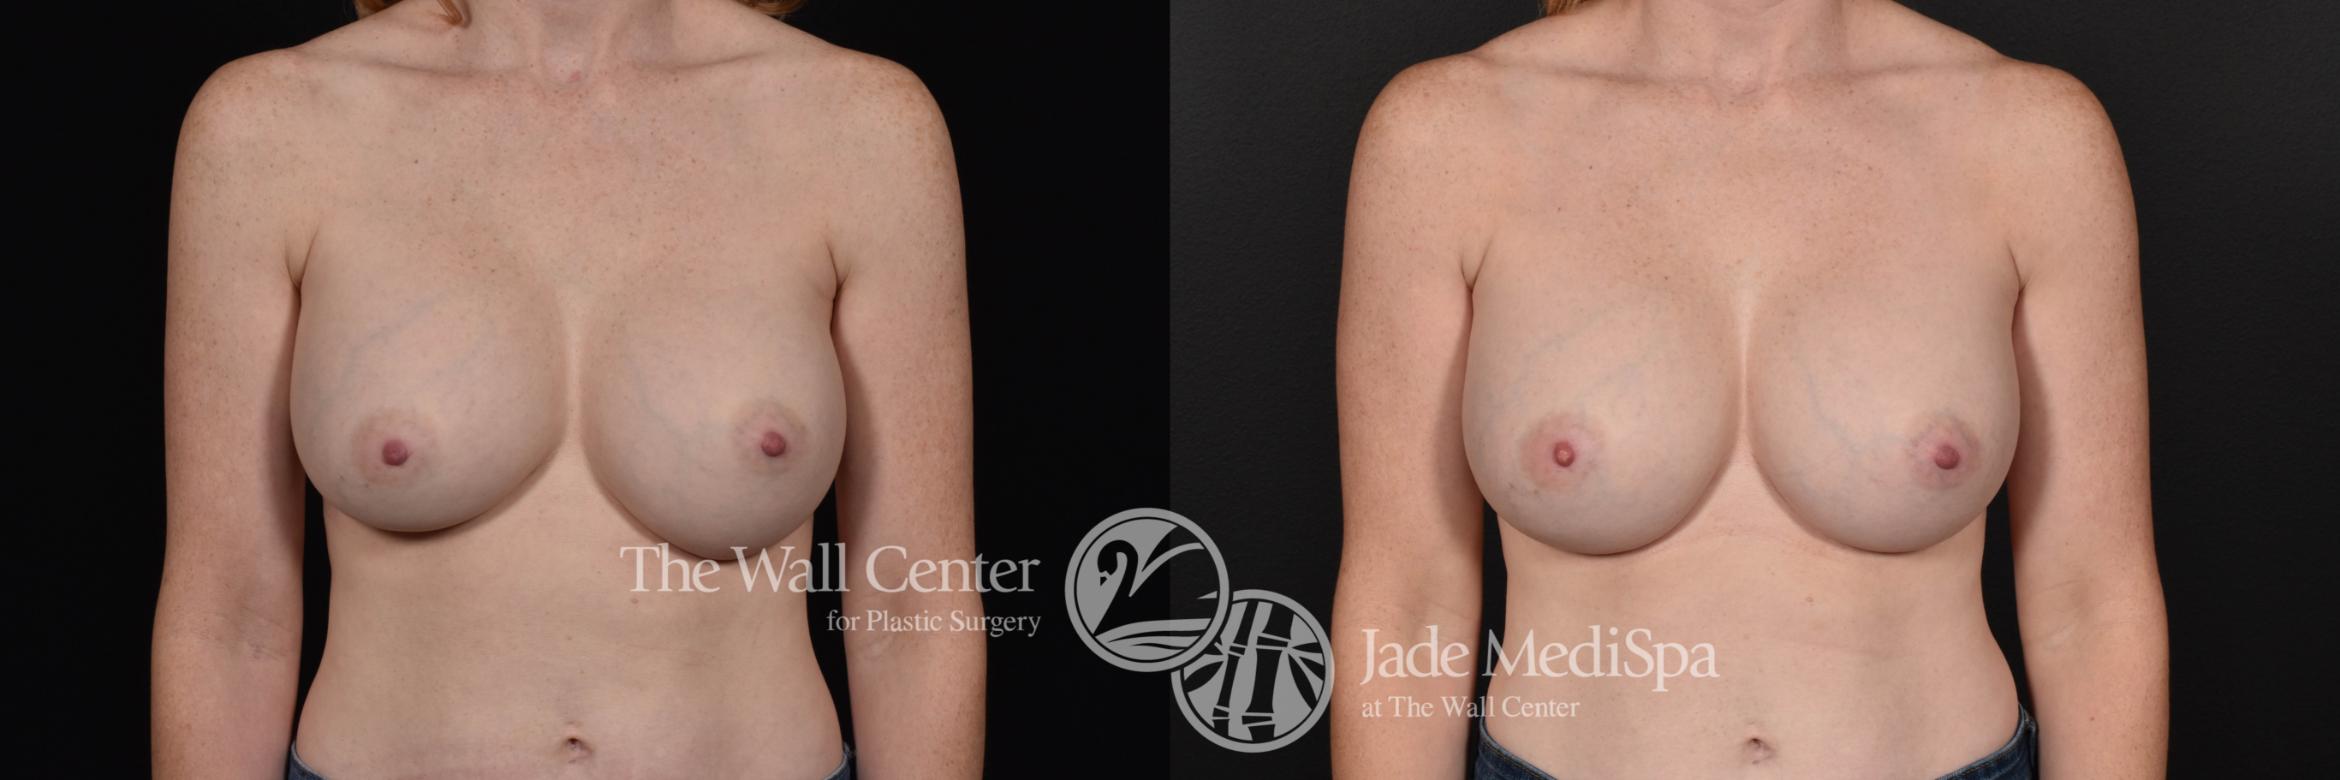 Breast Implant Exchange Front Photo, Shreveport, Louisiana, The Wall Center for Plastic Surgery, Case 859